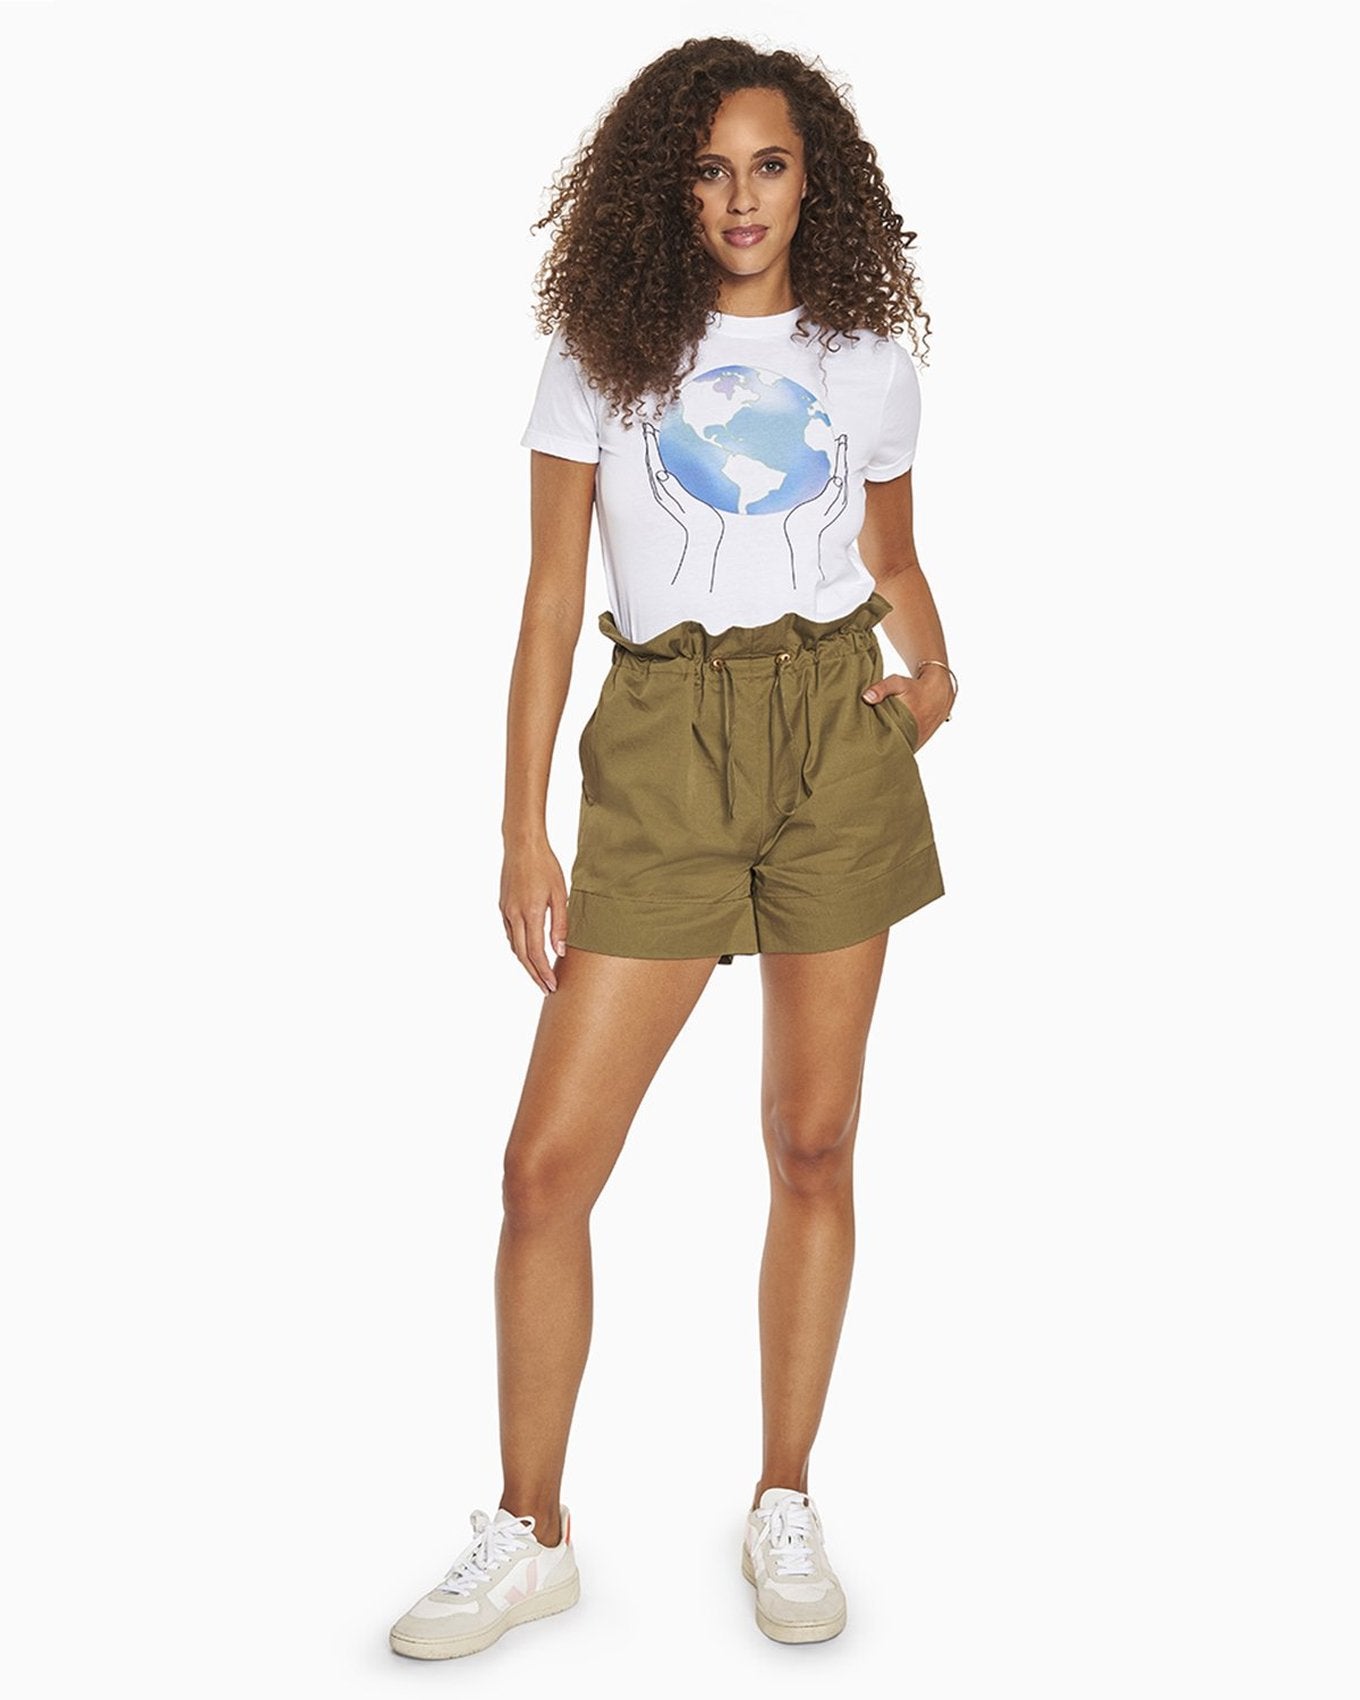 YesAnd Organic Paperbag Shorts Shorts in color Olive Branch and shape shorts